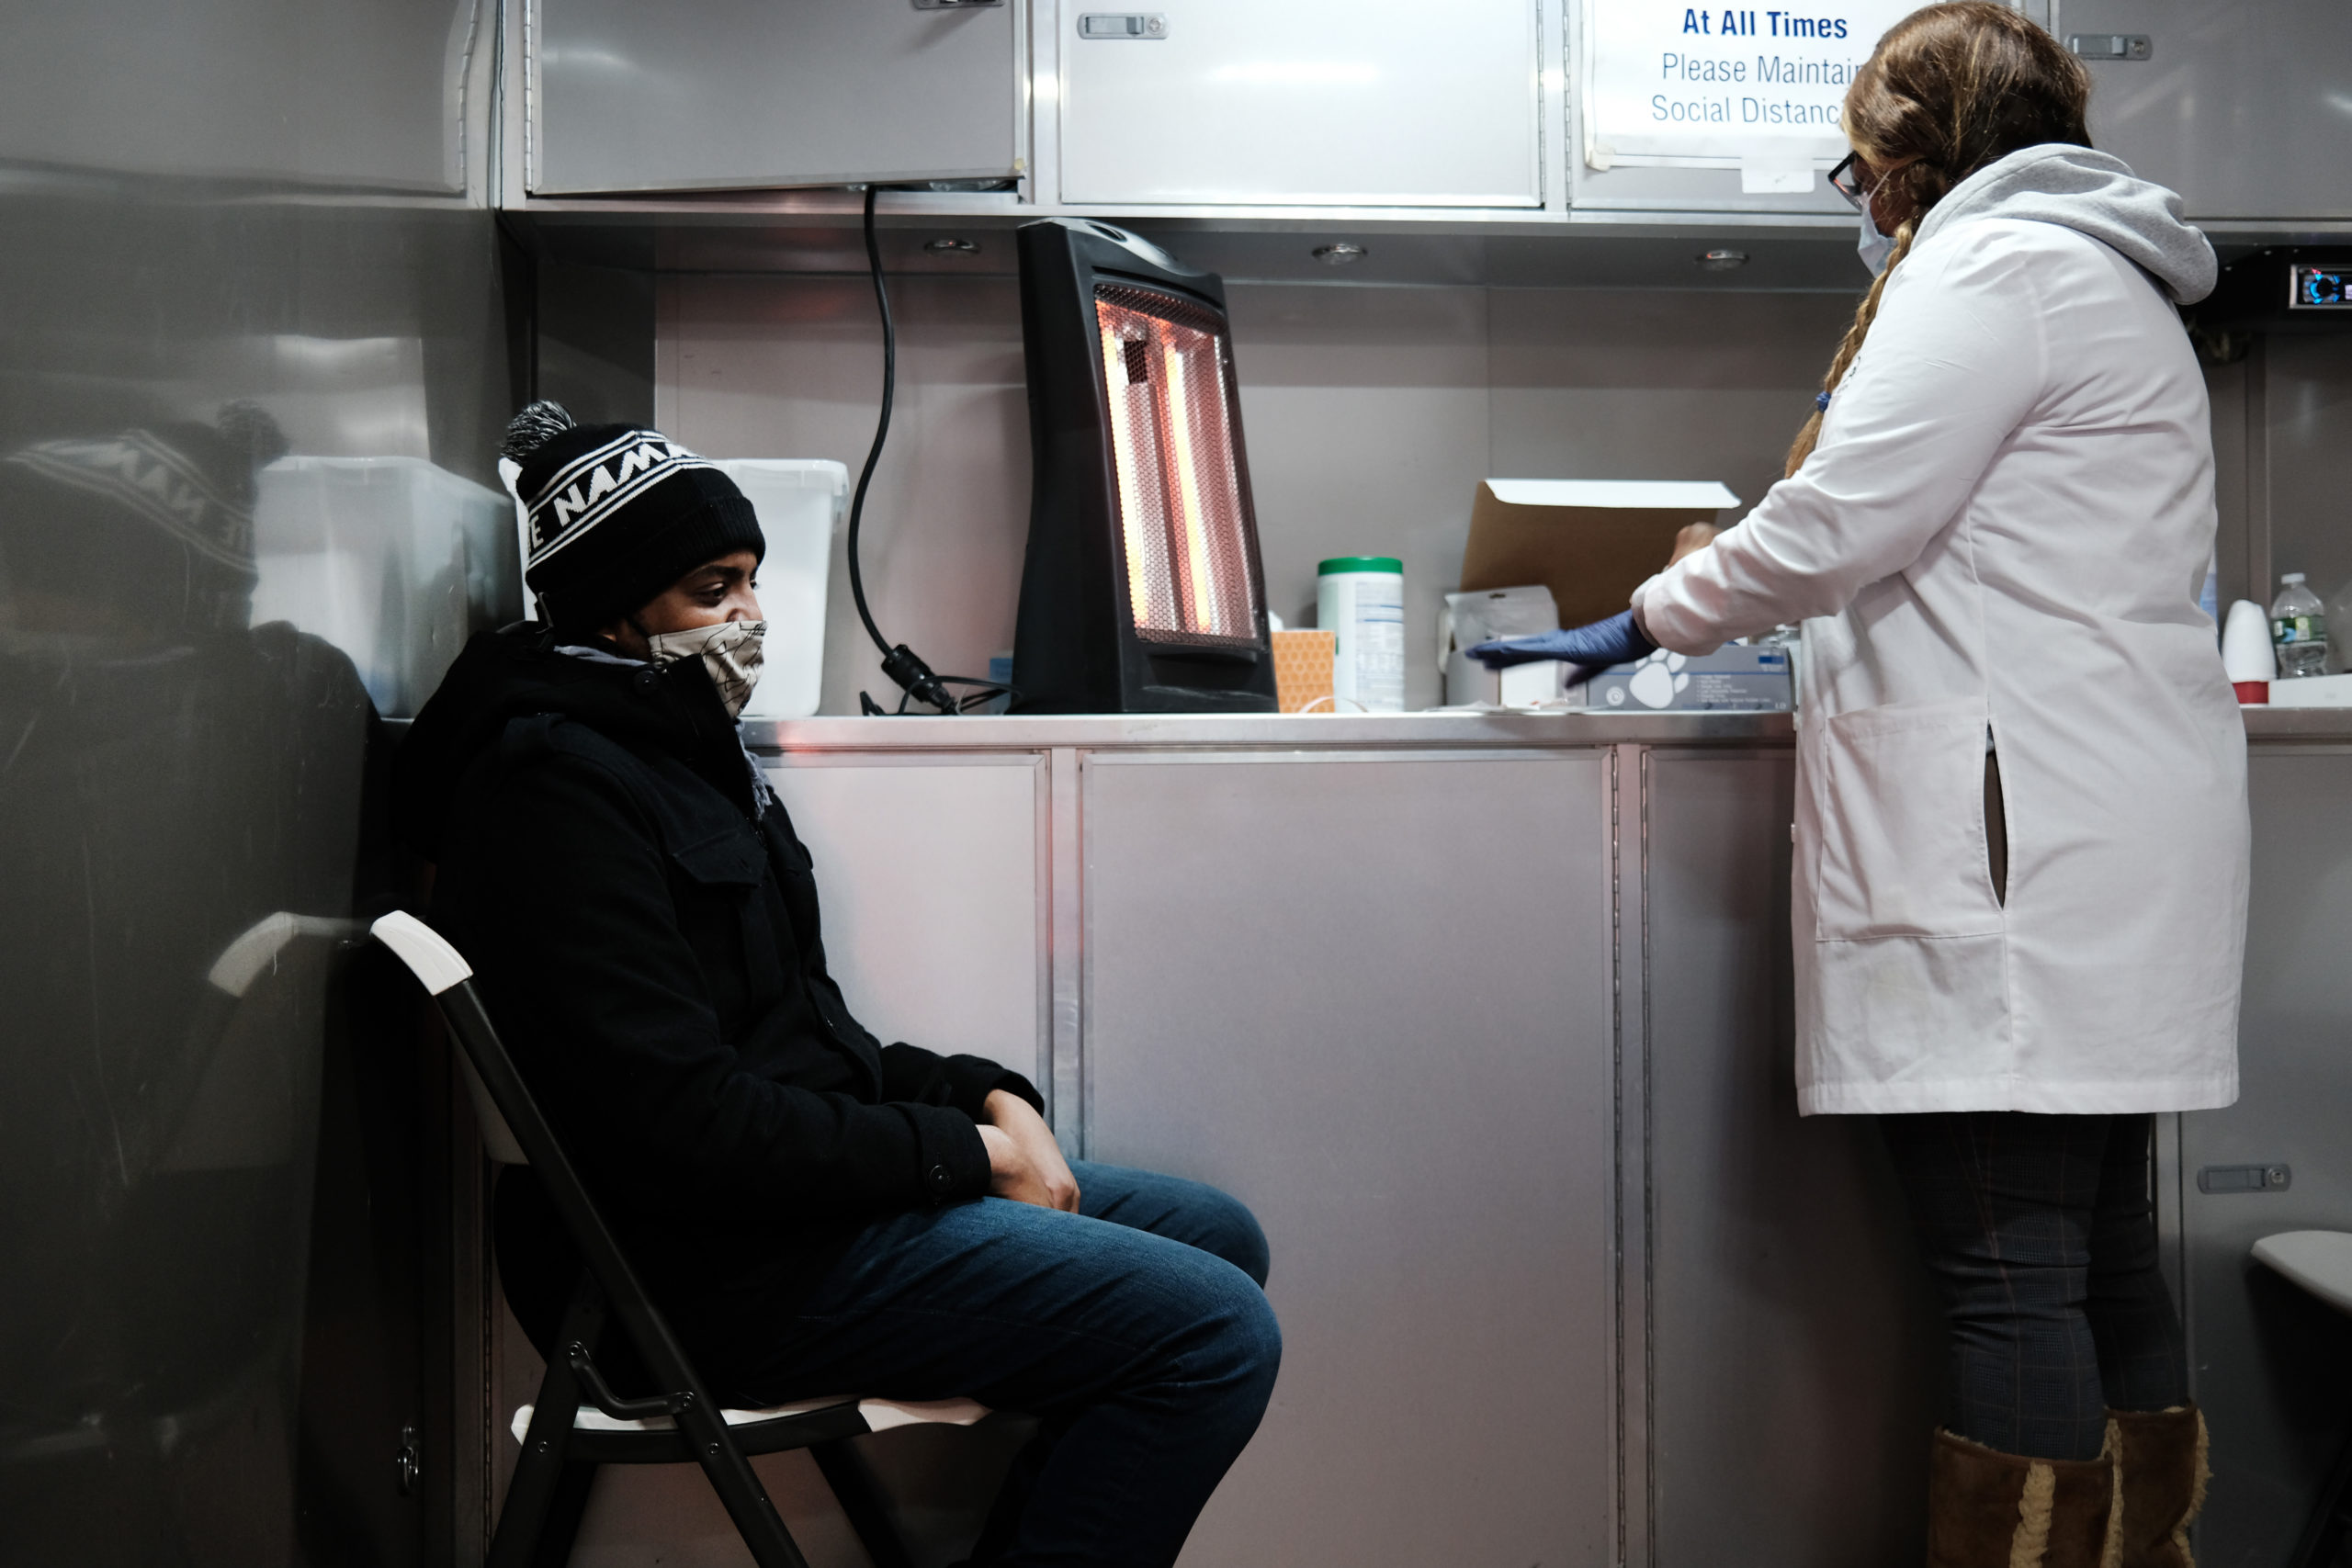 NEW YORK, NEW YORK - JANUARY 27: Jackie, a nurse, prepares a Covid-19 test at a mobile clinic in Brooklyn on January 27, 2021 in New York City. With the overall infection rate across the state on the decline and 72% of healthcare workers now having received the COVID-19 vaccine, Governor Andrew Cuomo has announced that some restrictions in New York may be lifted in the near future. According to the Governor this will not include indoor dining. (Photo by Spencer Platt/Getty Images)